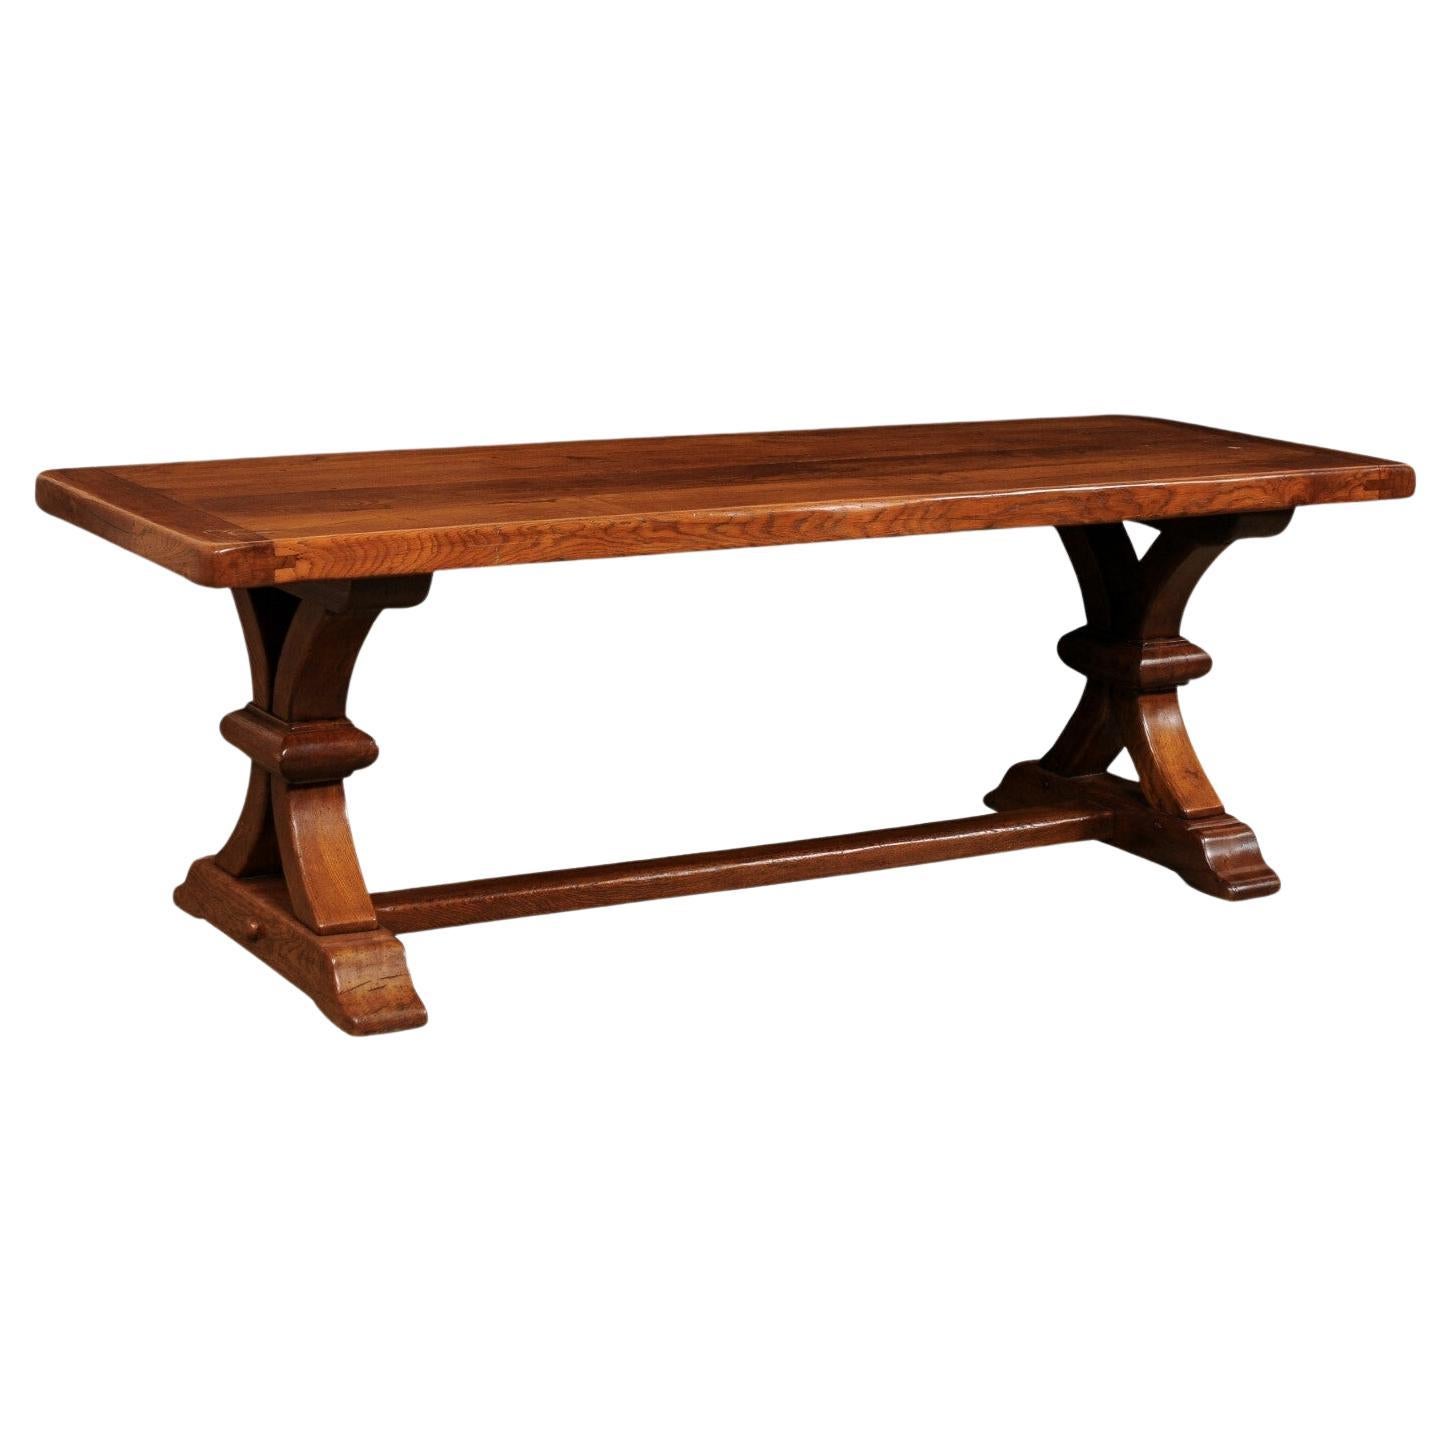 Antique French Wooden Dining Table w/Nicely Carved Trestle Legs, 7+ Ft Long For Sale